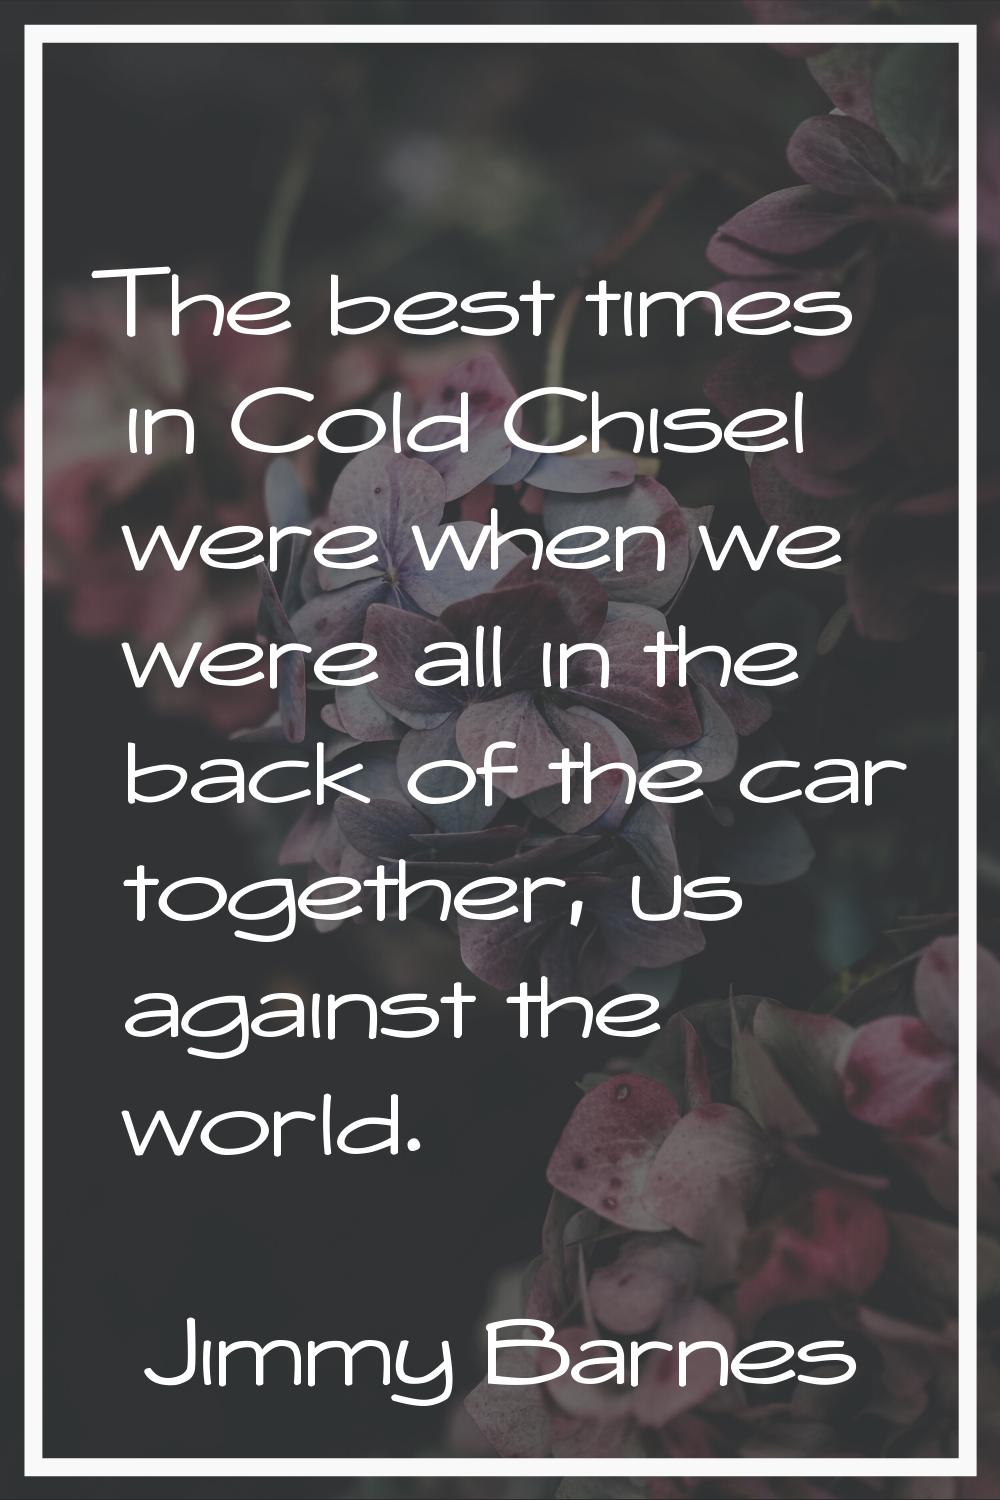 The best times in Cold Chisel were when we were all in the back of the car together, us against the